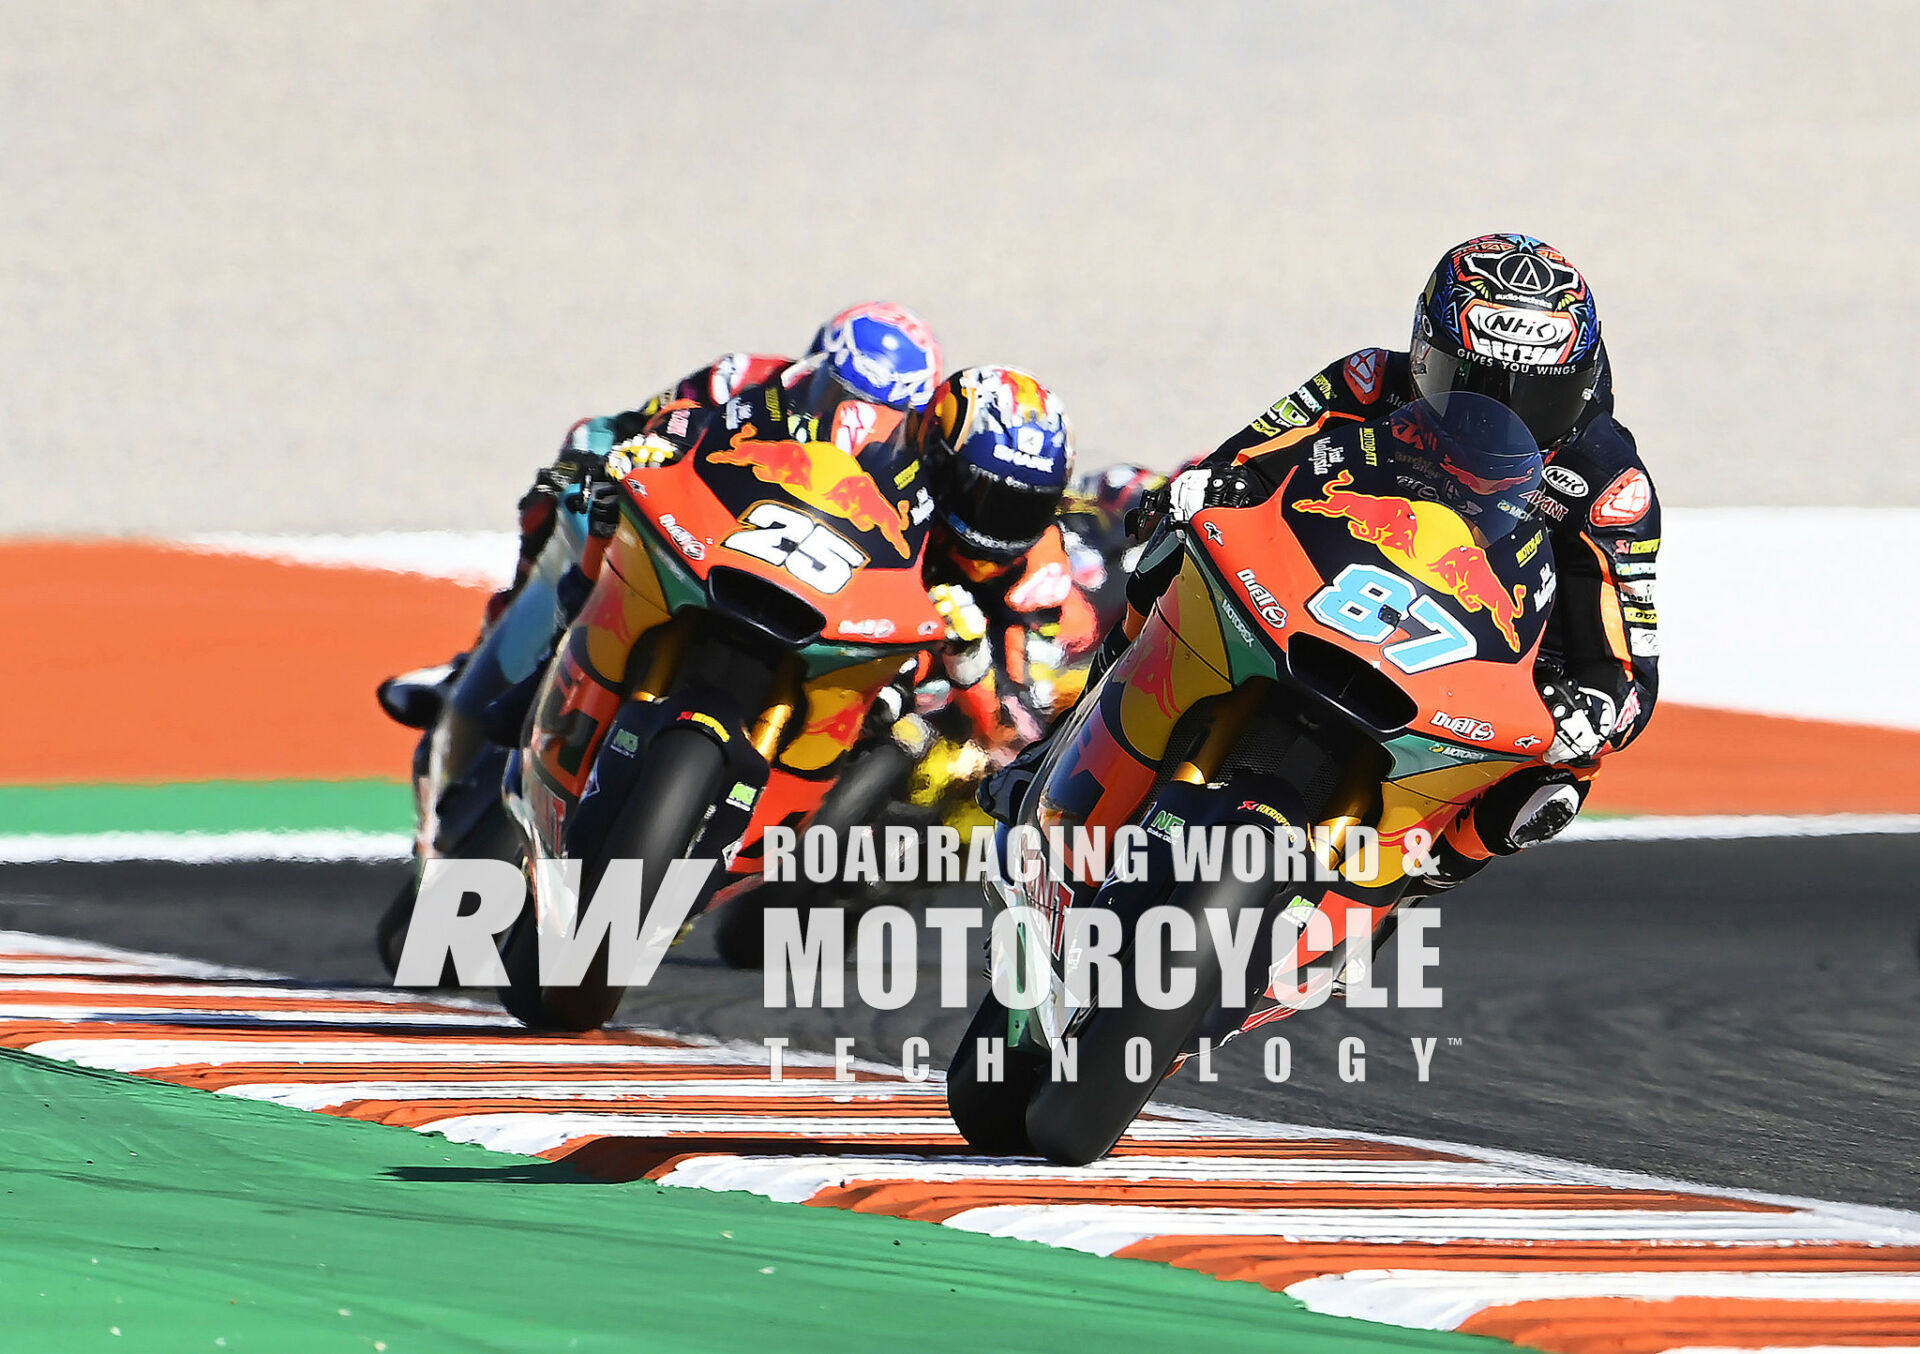 Remy Gardner (87) won the 2021 Moto2 World Championship by beating his Red Bull KTM Ajo teammate (and title runner-up) Raul Fernandez (25). Like the overwhelming majority of riders in the Moto2 World Championship over the last decade, both were running Kalex chassis. Photo from Valencia 2021 courtesy Red Bull.